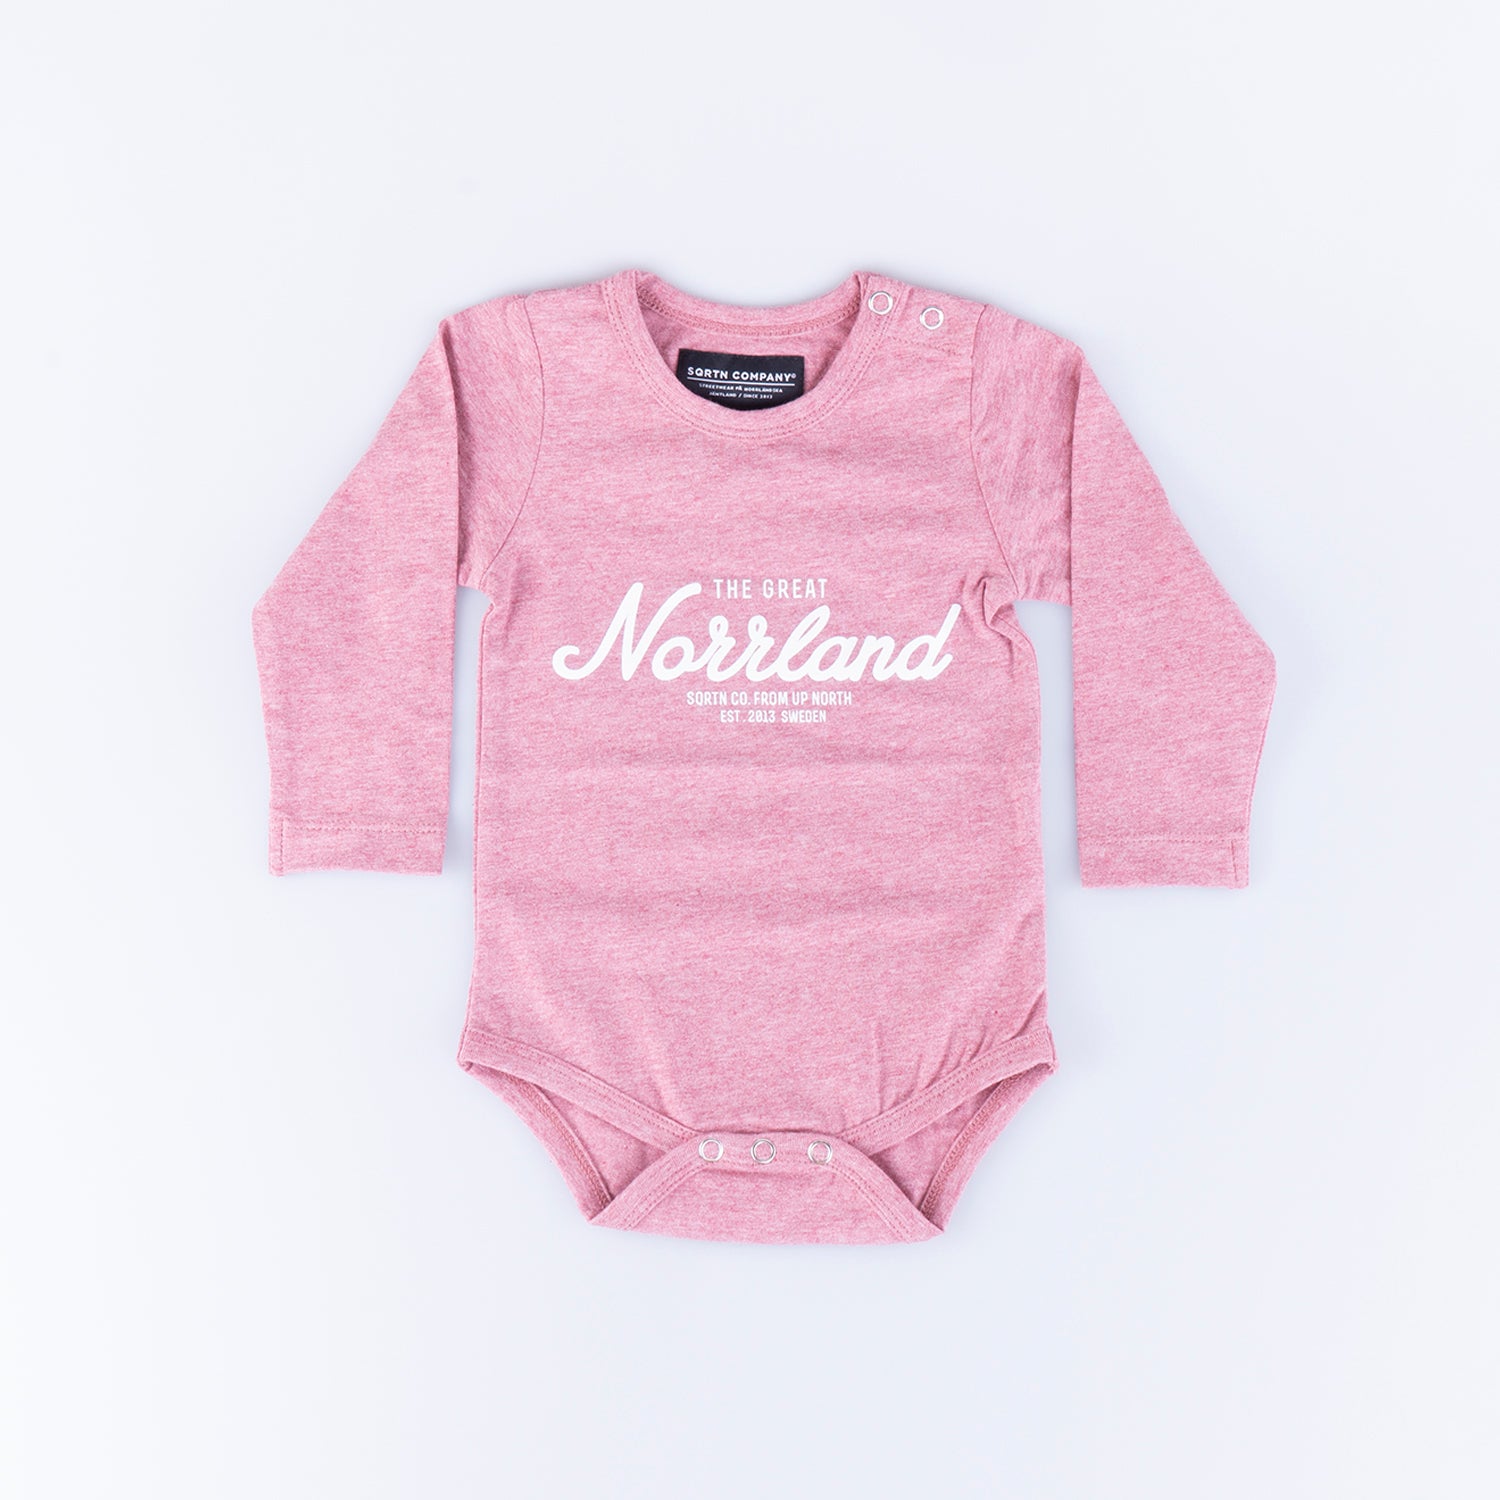 GREAT NORRLAND BODY - PINK